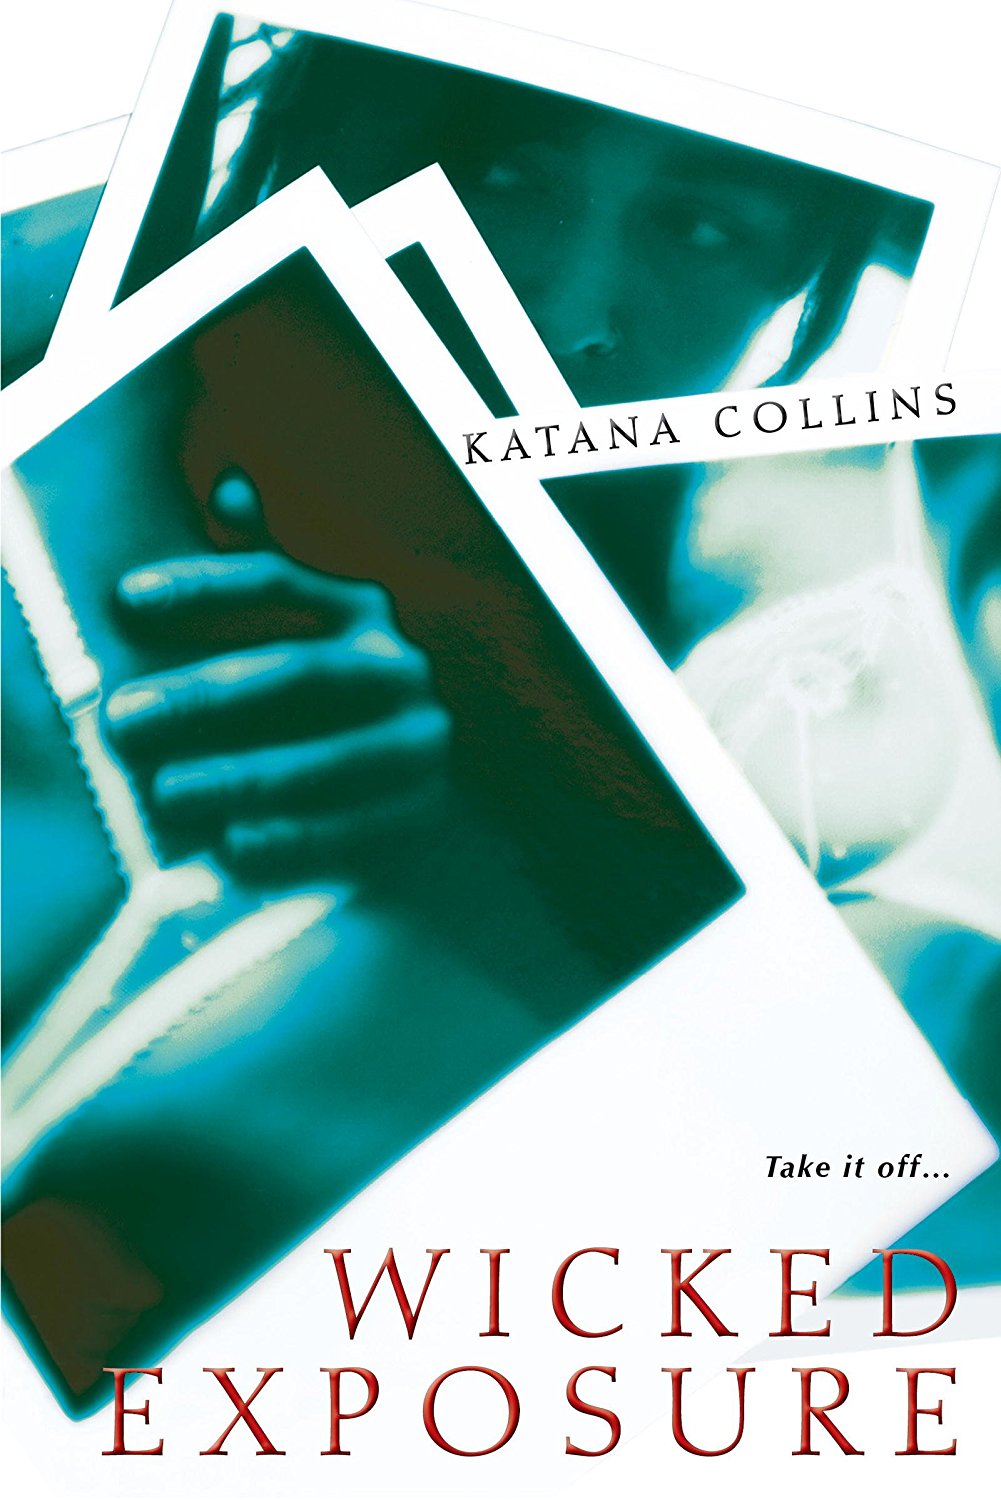 Wicked Exposure by Katana Collins